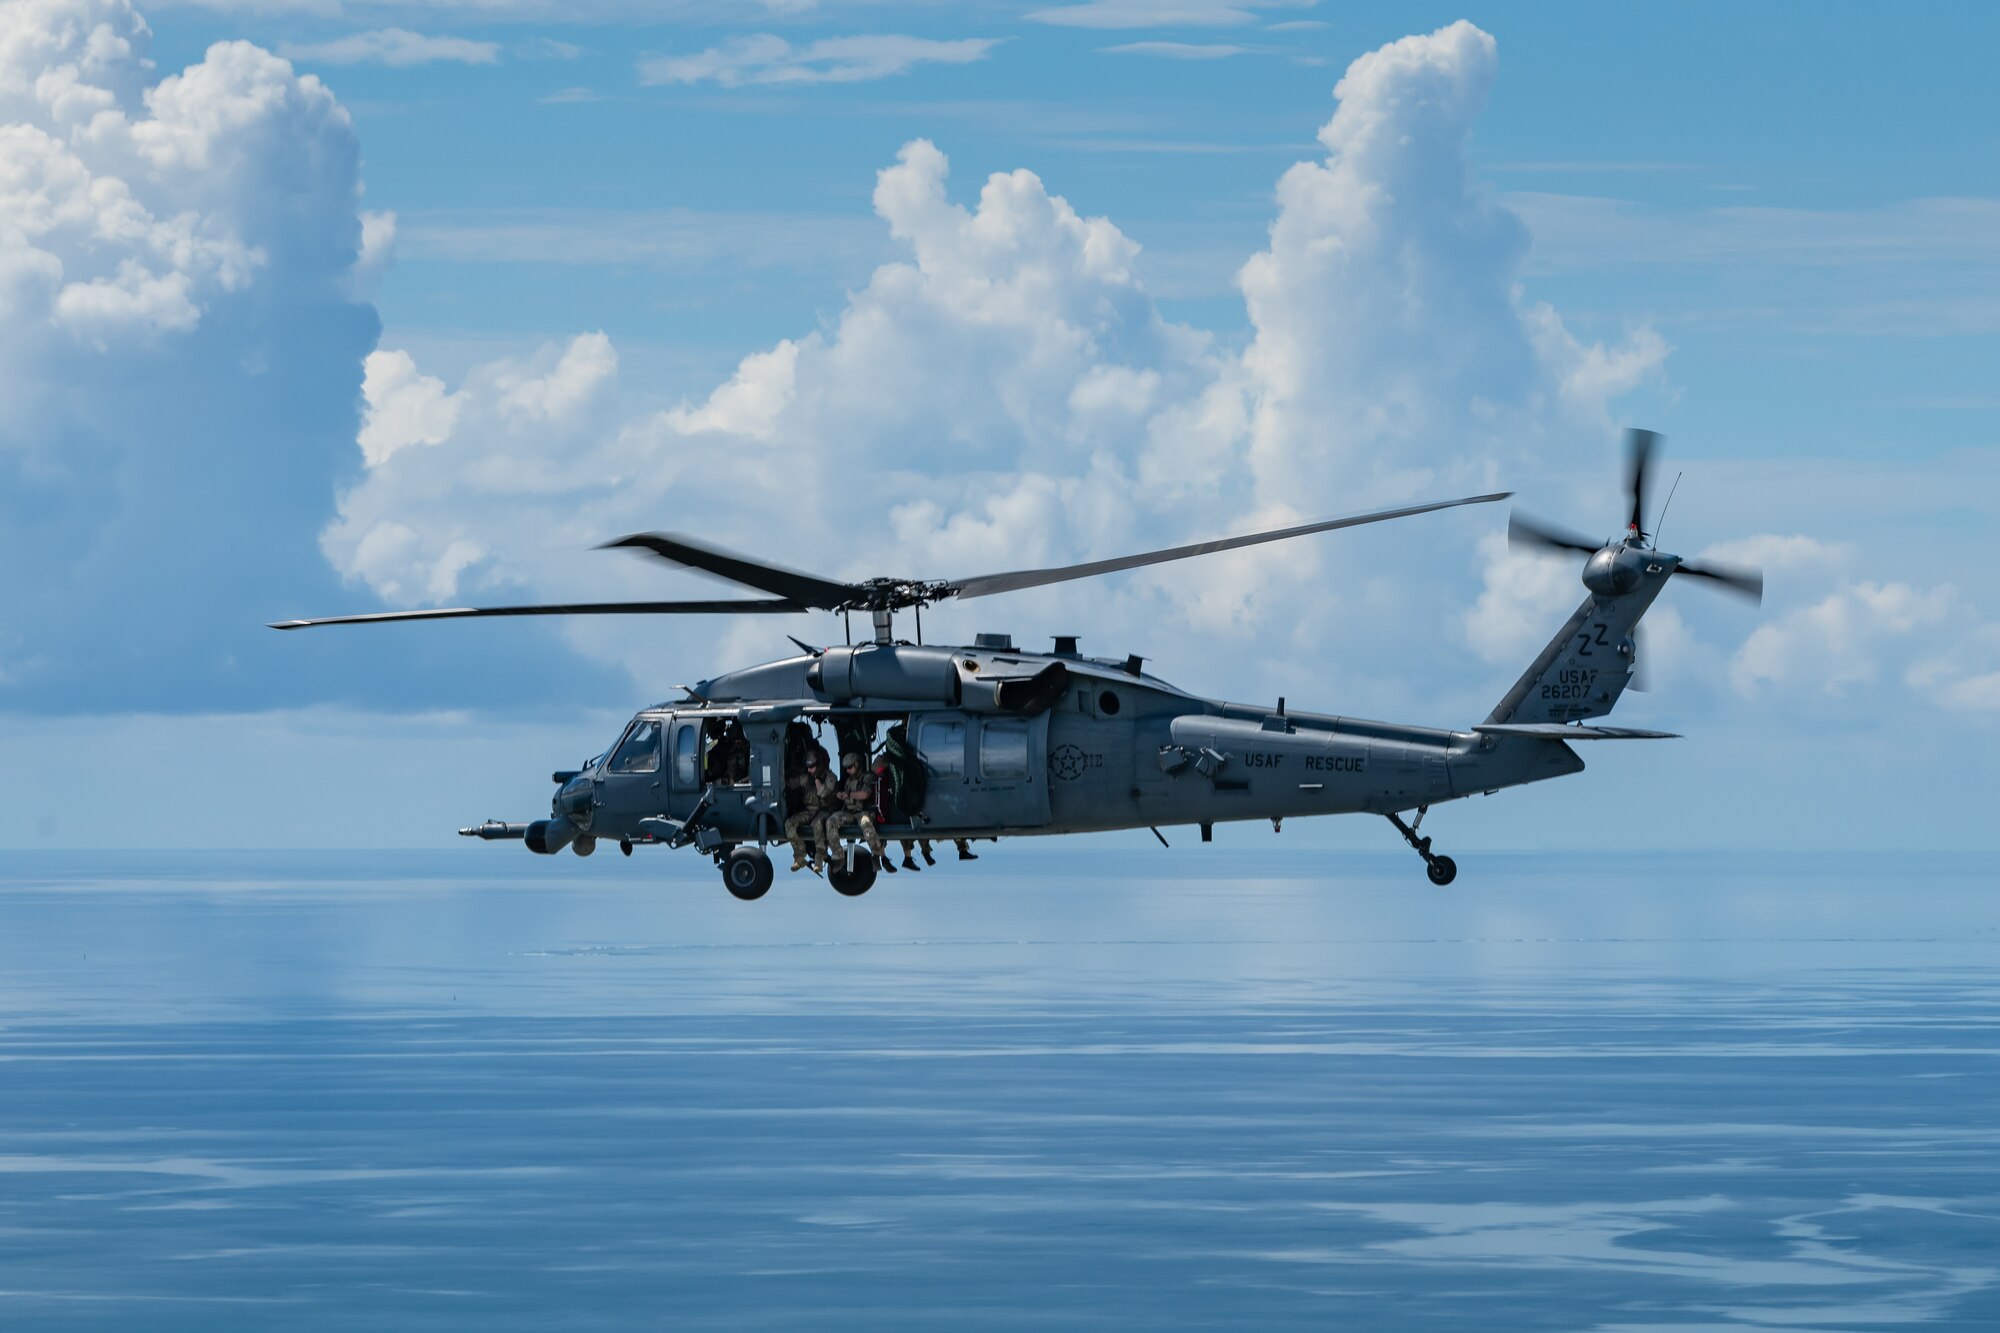 An HH-60G Pave Hawk from the 33rd Rescue Squadron flies during a training exercise, July 26, 2019, out of Kadena Air Base, Japan. The 33rd RQS has performed search, rescue, and recovery missions since 1952. (U.S. Air Force photo by Airman 1st Class Matthew Seefeldt)